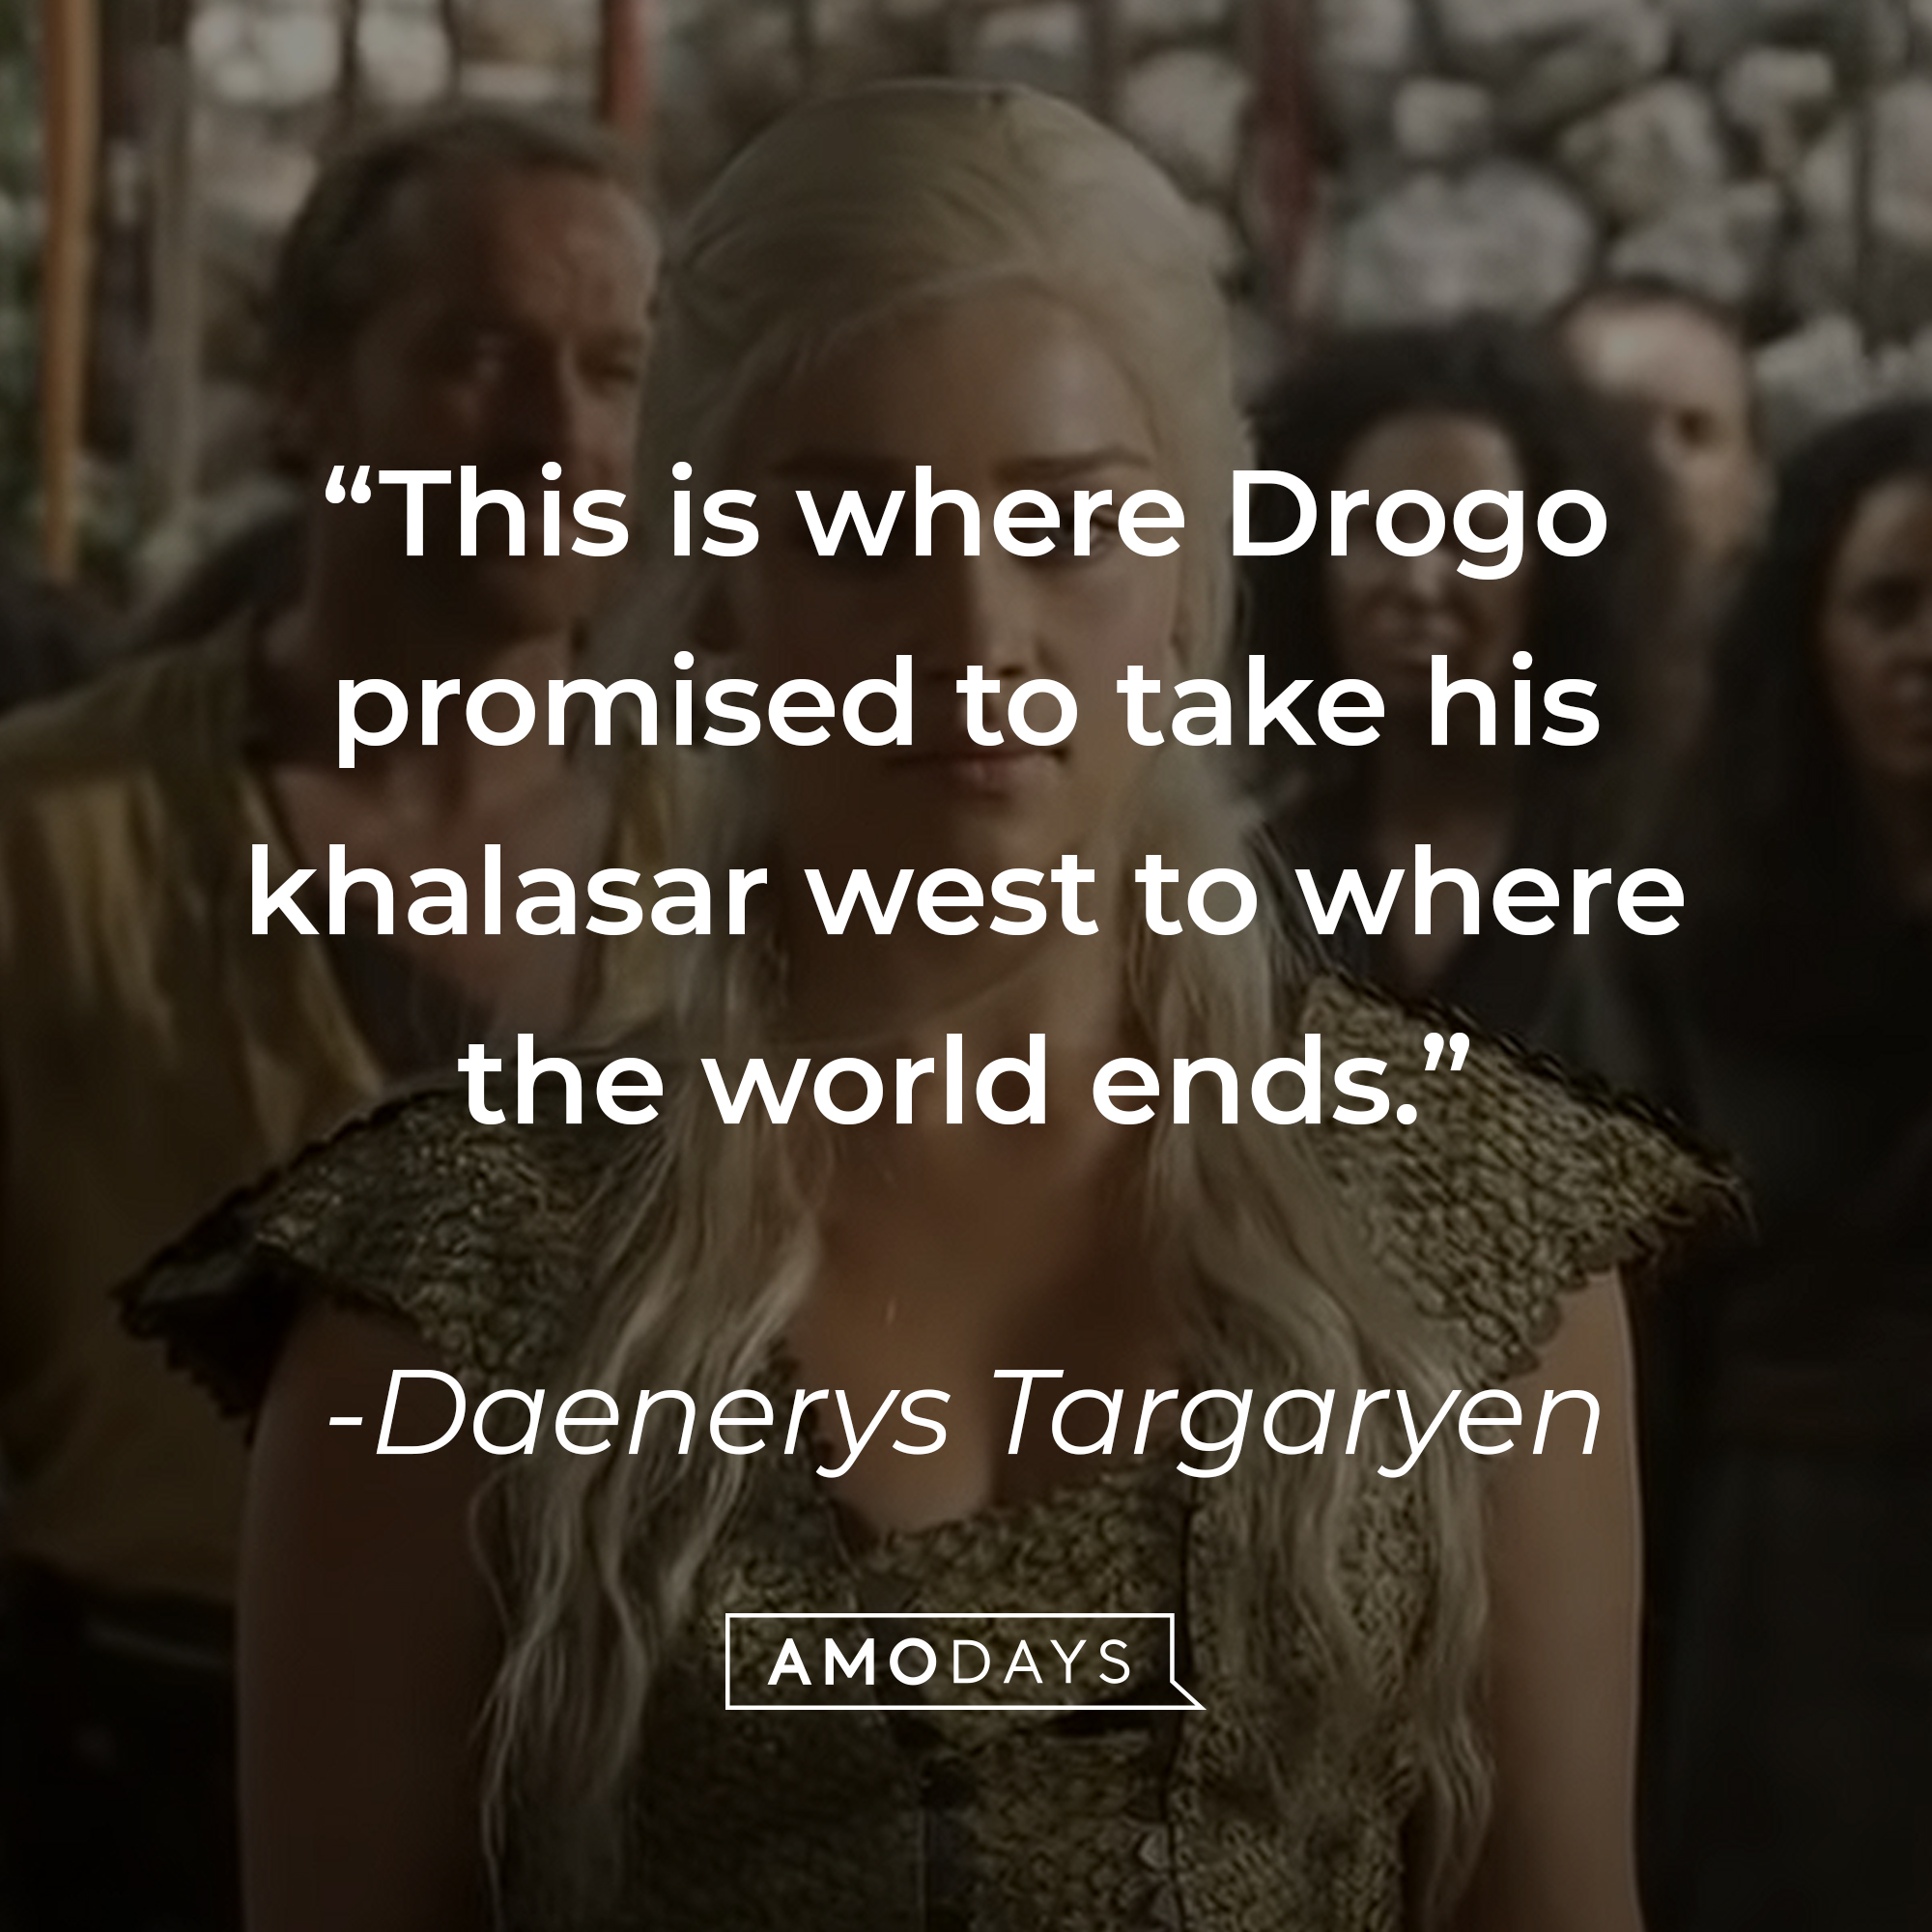 Daenerys Targaryen's quote: "This is where Drogo promised to take his khalasar west to where the world ends." | Source: youtube.com/gameofthrones